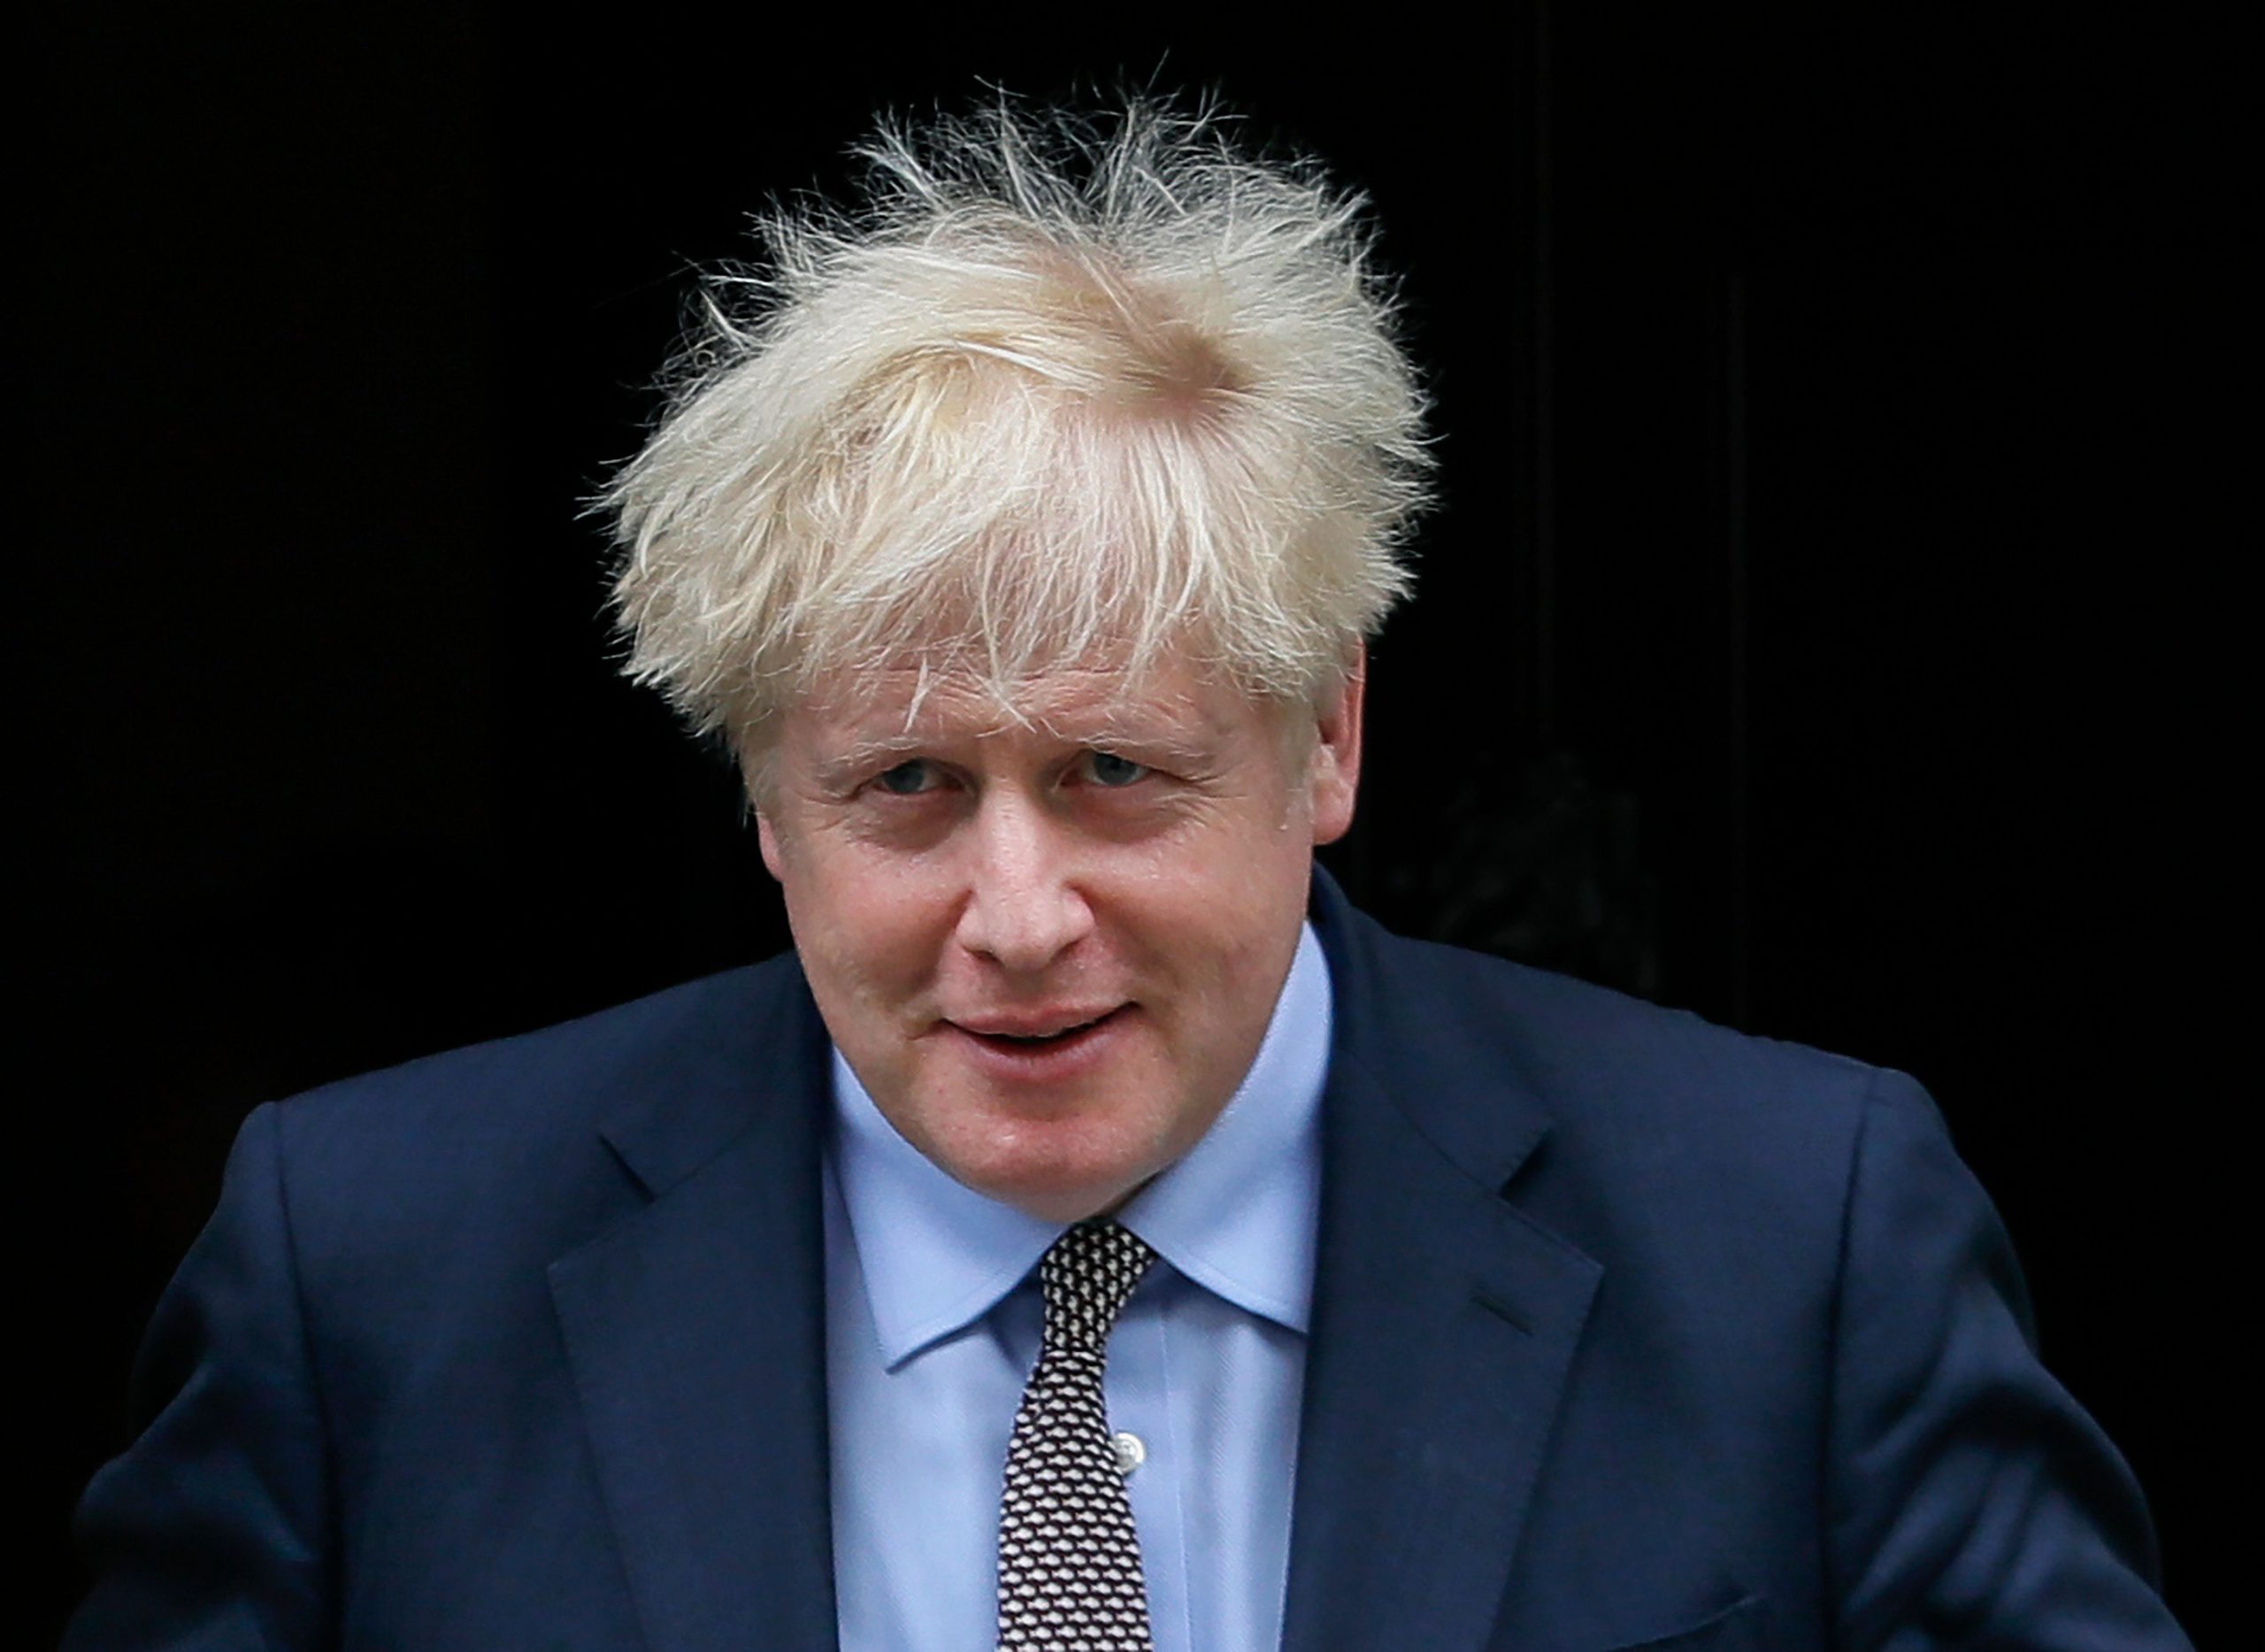 UK PM Boris Johnson’s Republic Day visit to India may not take place: Report